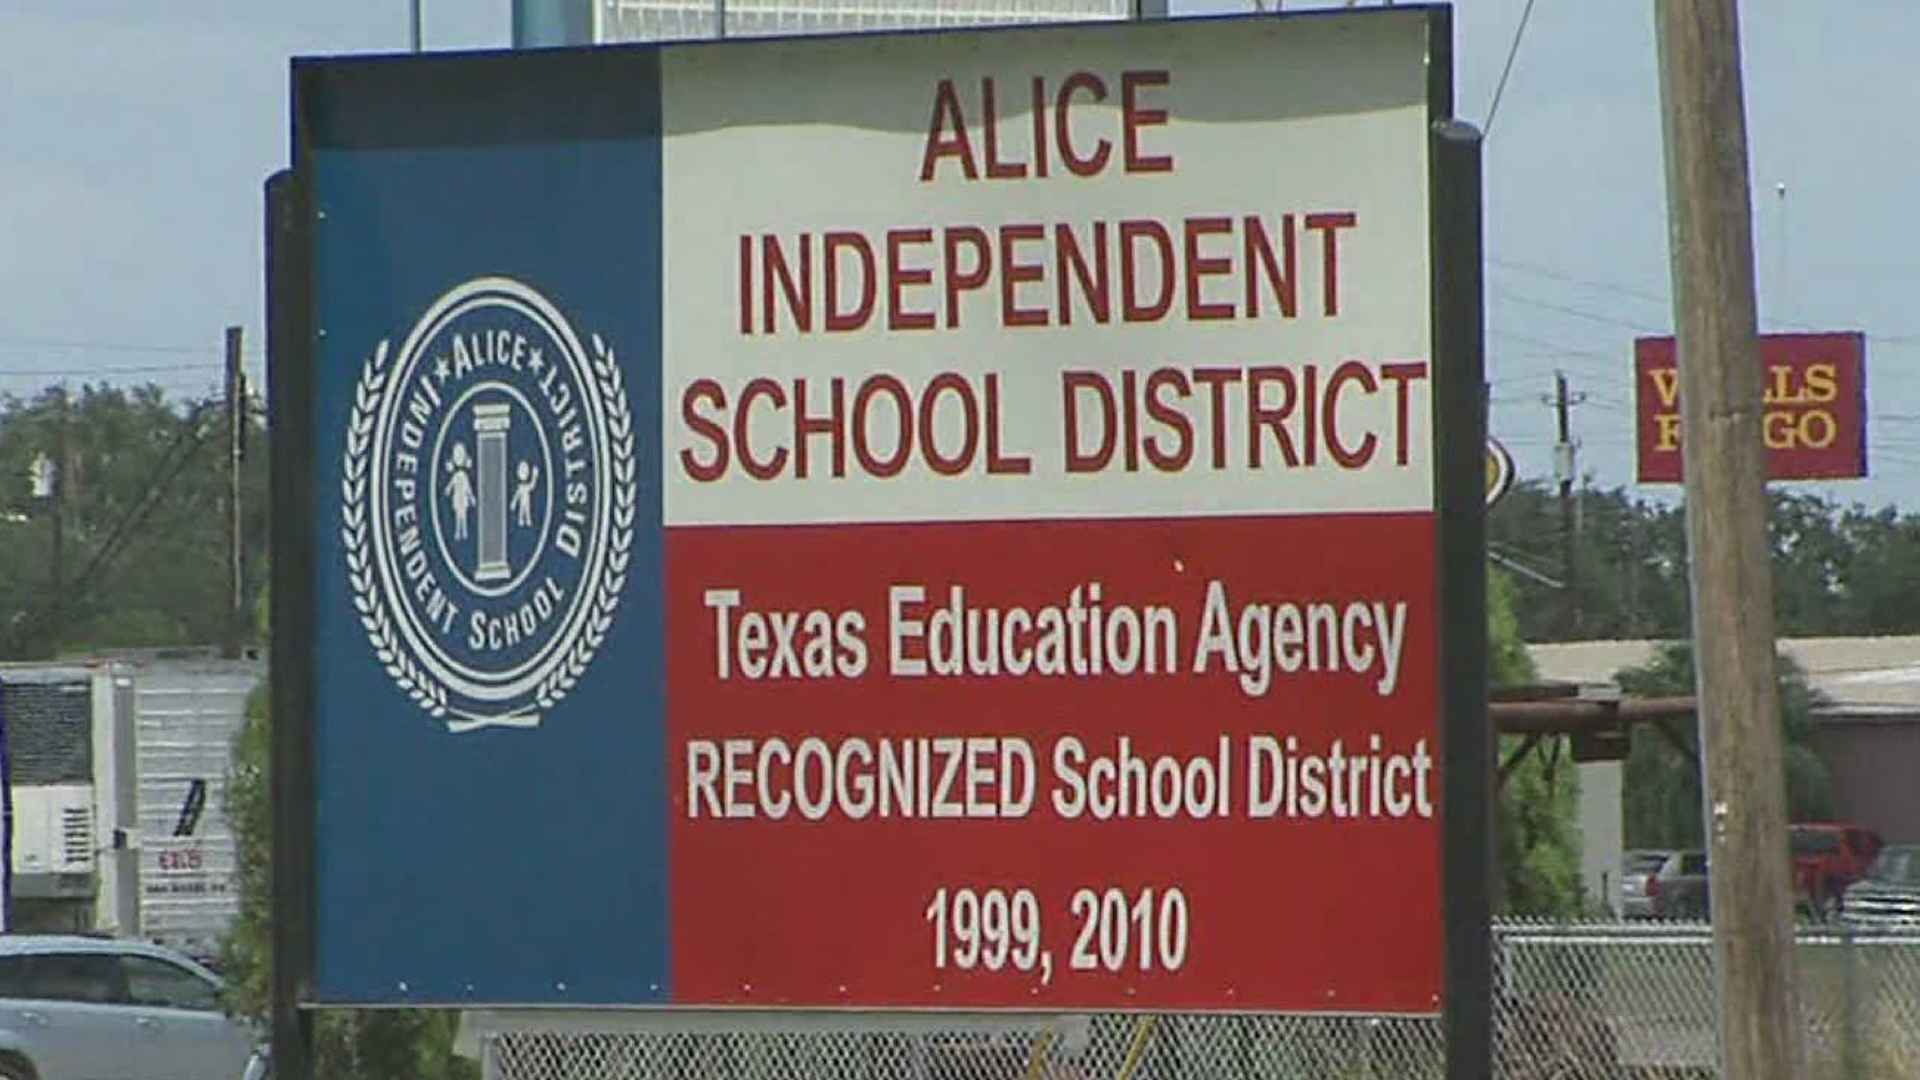 Alice ISD officials said they tested 473 students and staff that resulted in 10 positive cases, and five more were self-reported to the district.